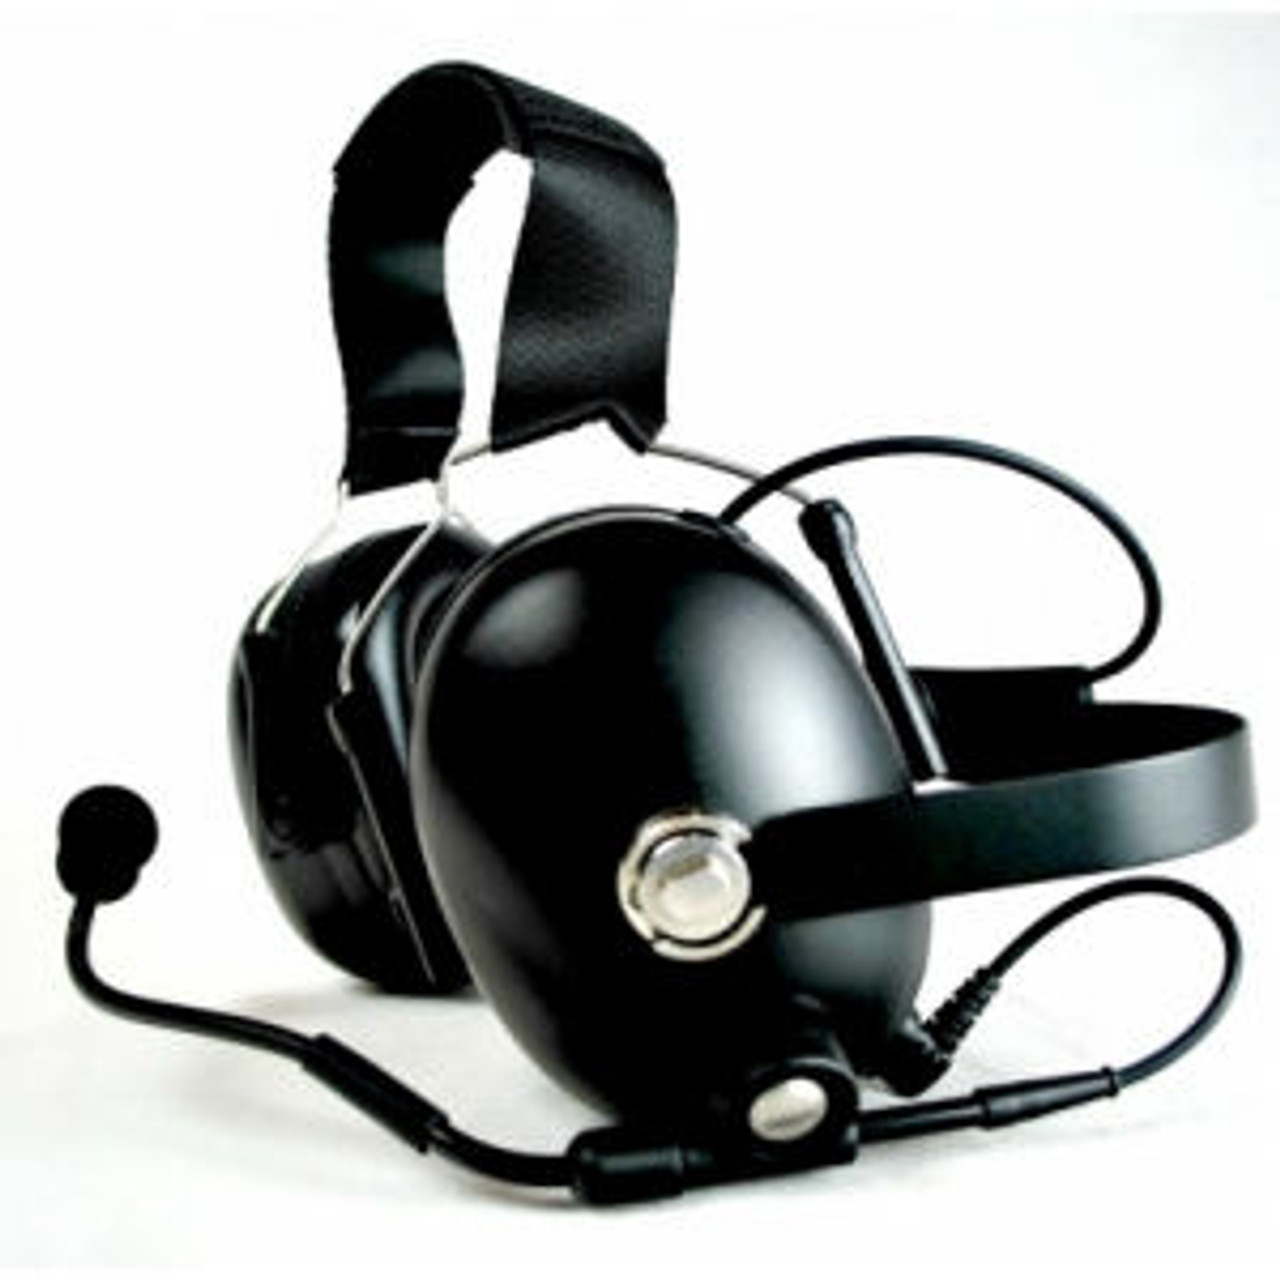 M/A-Com P7370 Noise Canceling Double Muff Behind The Head Headset